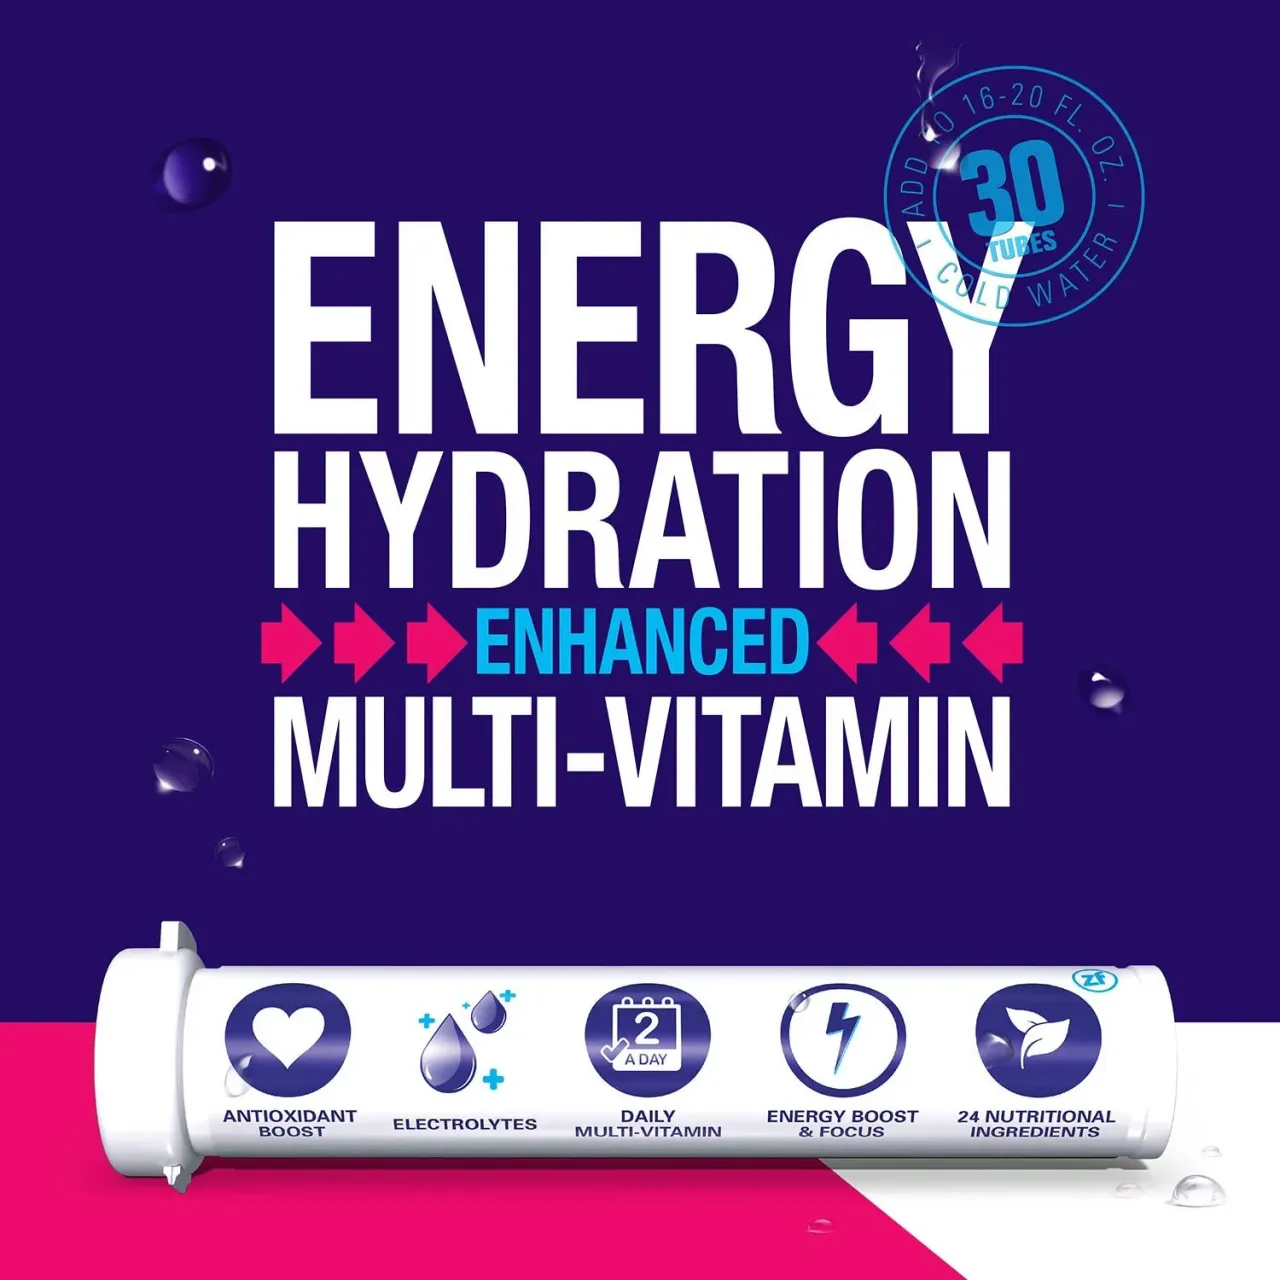 3 Zipfizz Multi-Vitamin Energy Hydration Drink Mix, Variety Pack, 30 Tubes